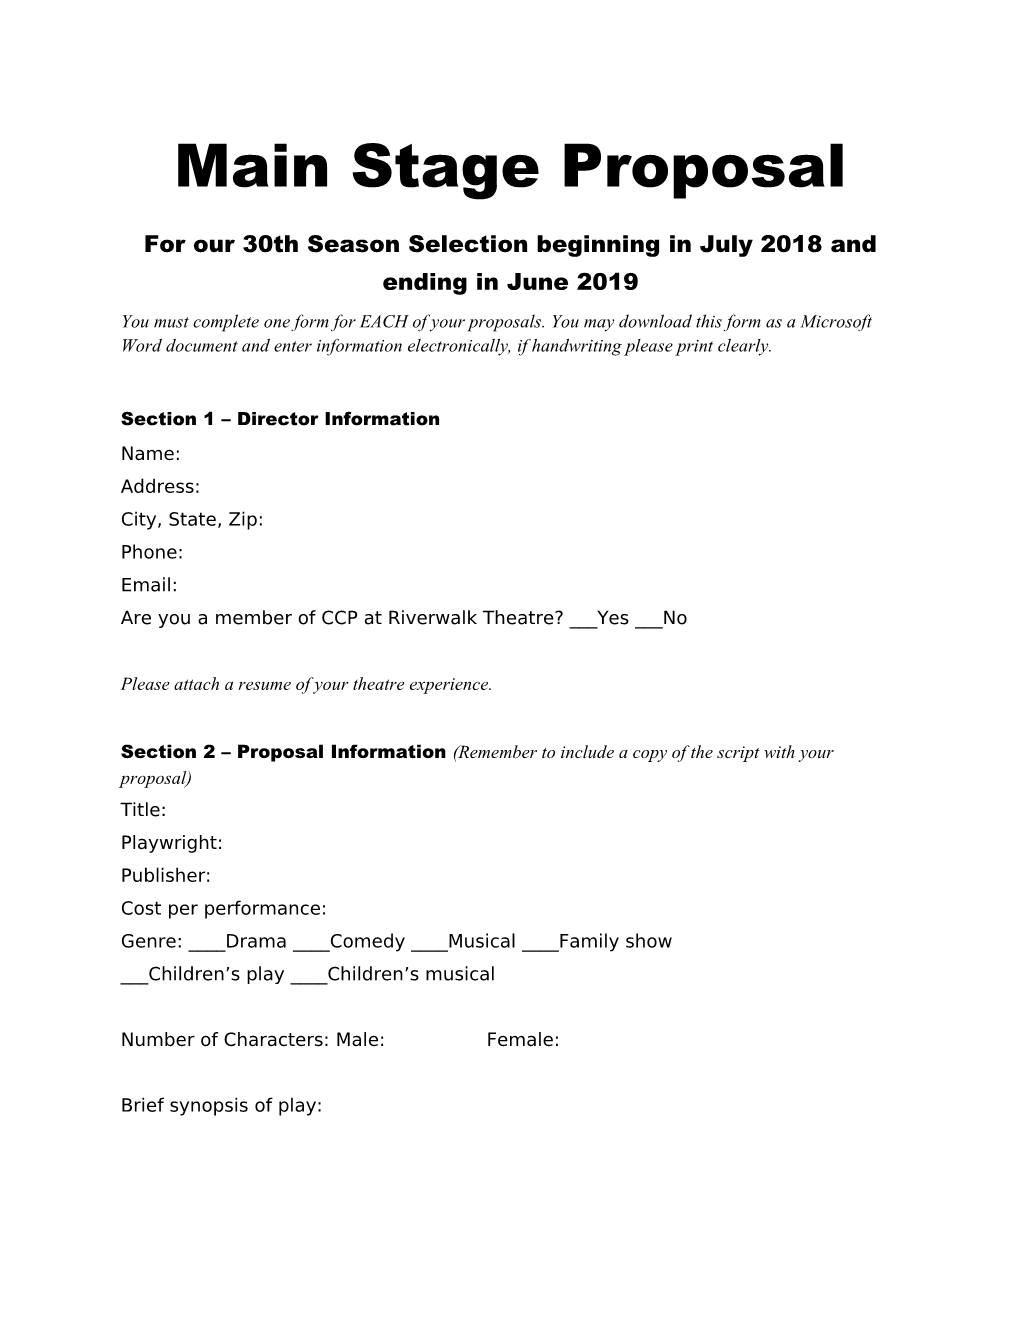 Main Stage Proposal